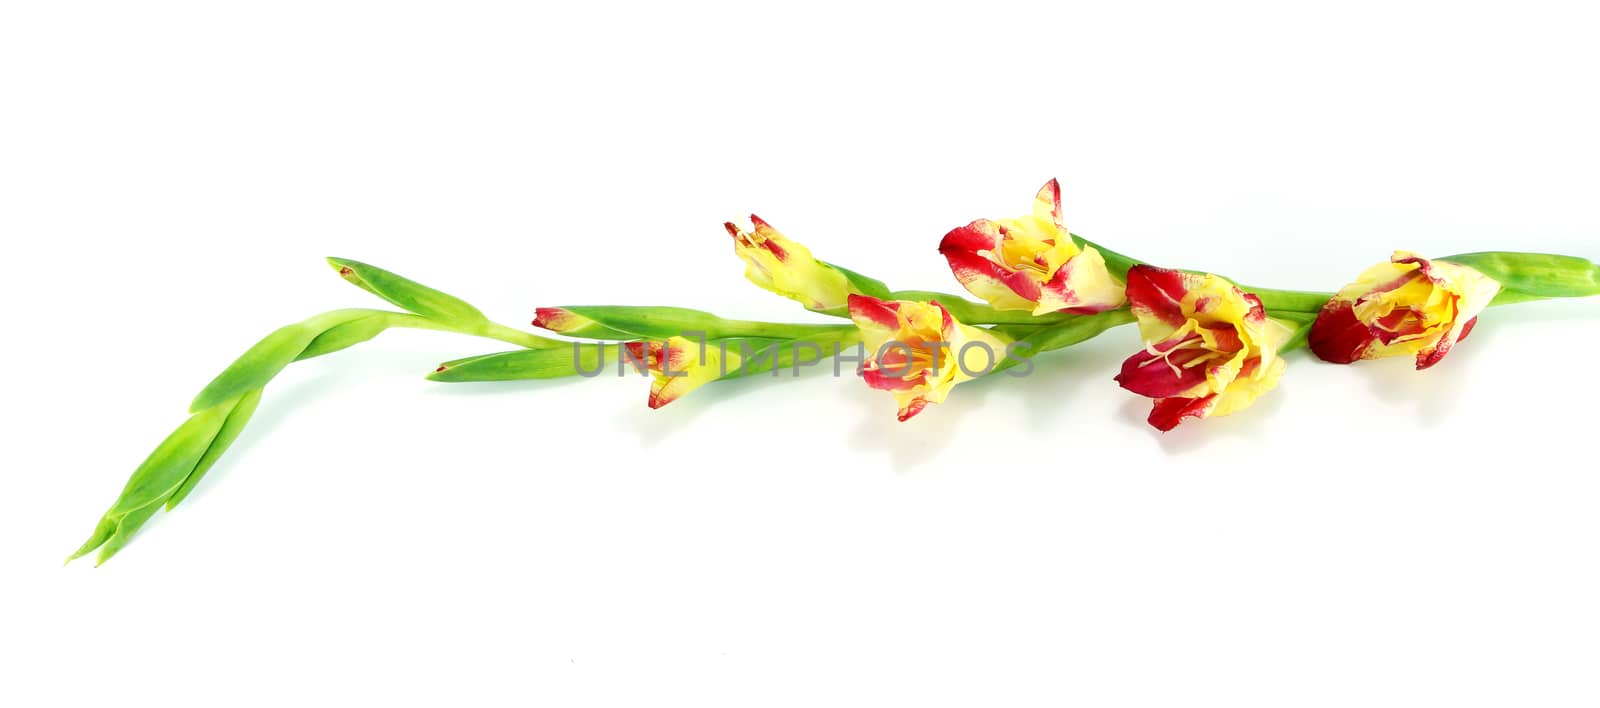 branch of yellow-pink gladiolus on white background close-up by Noppharat_th